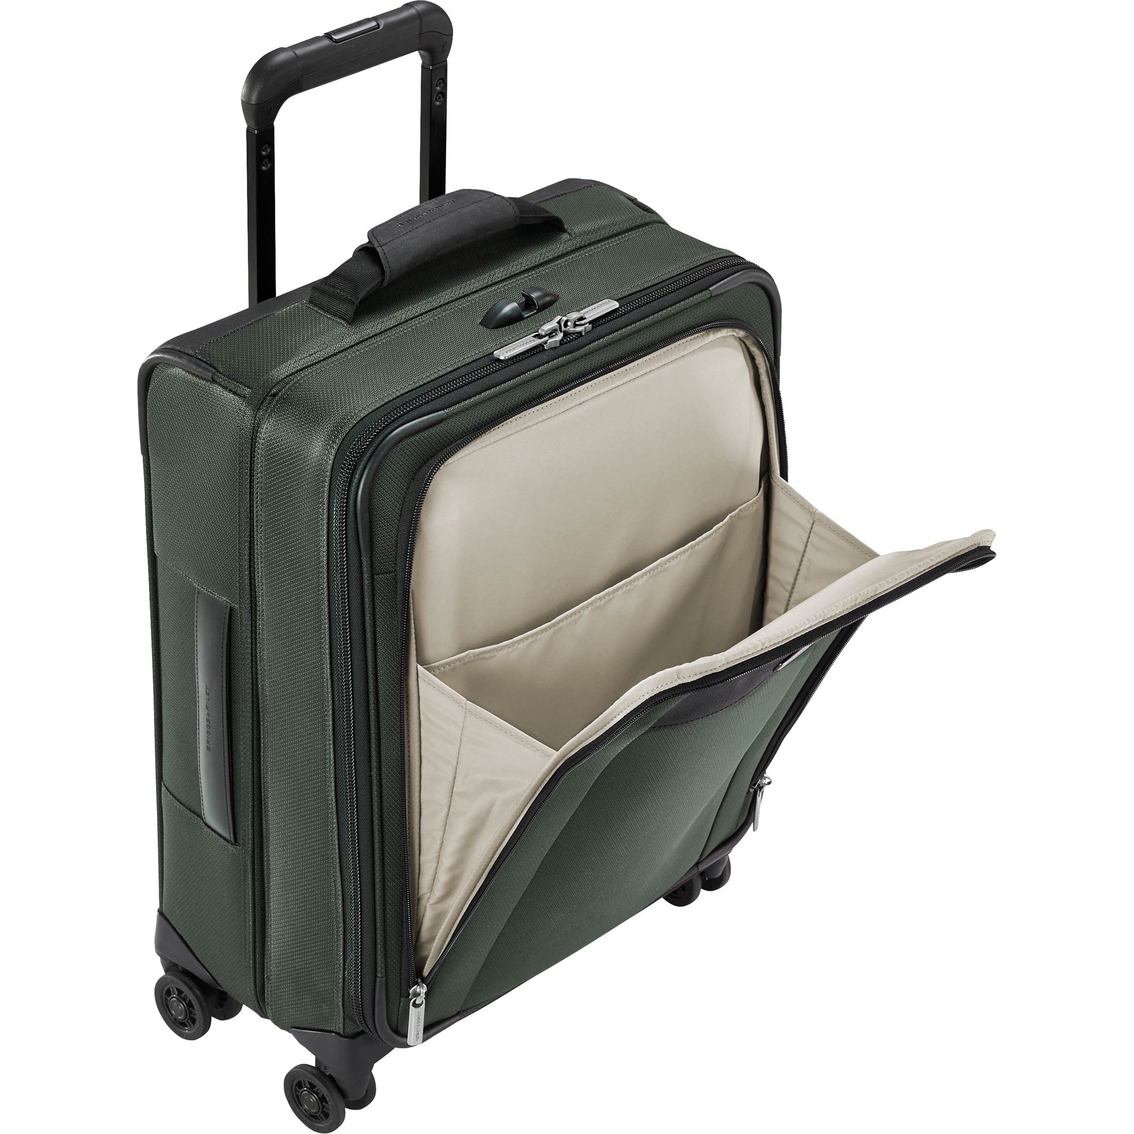 Briggs & Riley Transcend Wide Carry On Expandable Spinner - Image 4 of 4